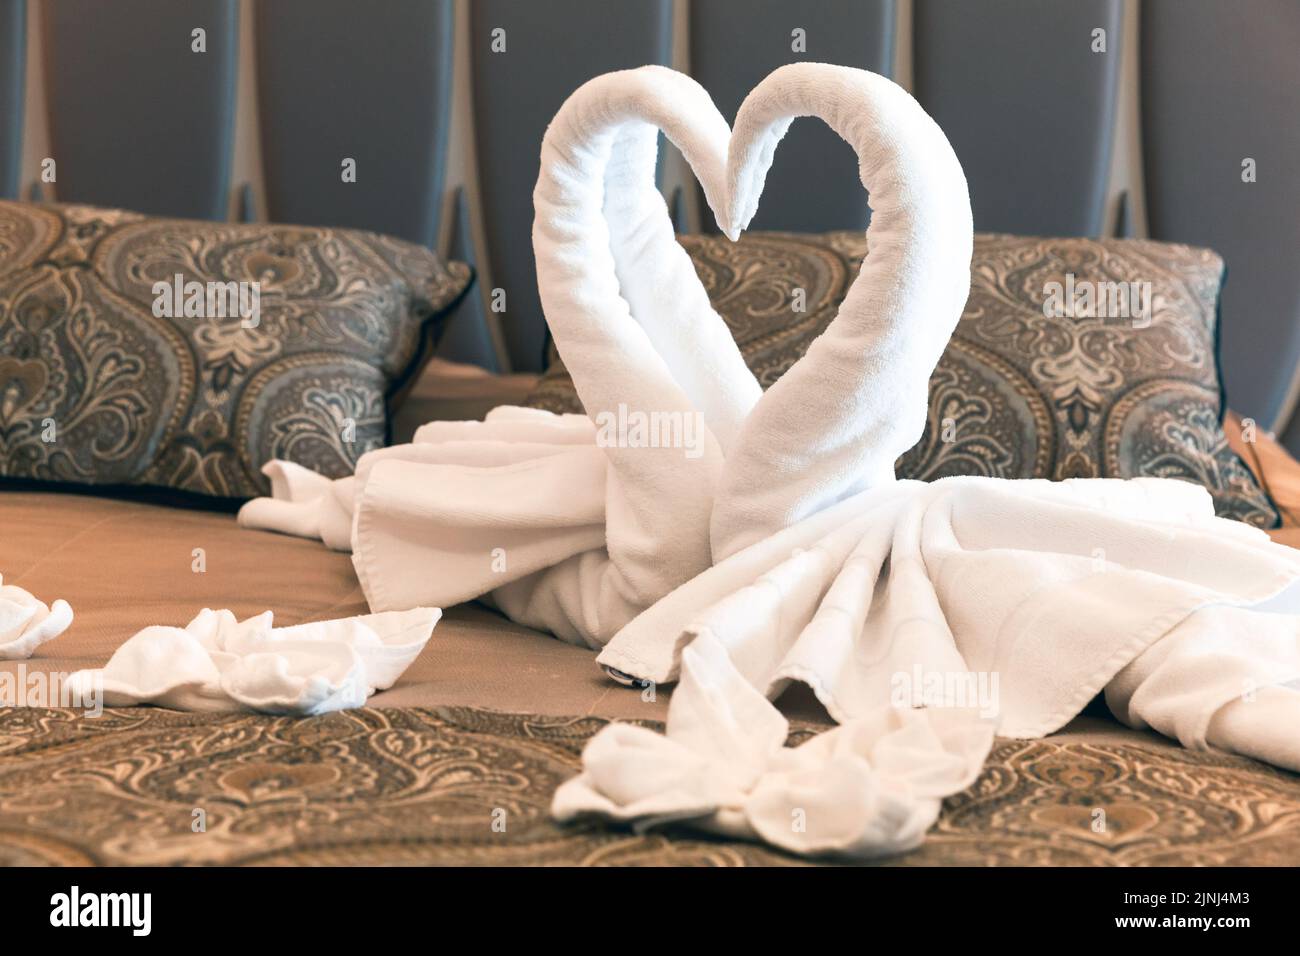 Swans made of white towels, romantic decoration of a honeymoon suite Stock Photo